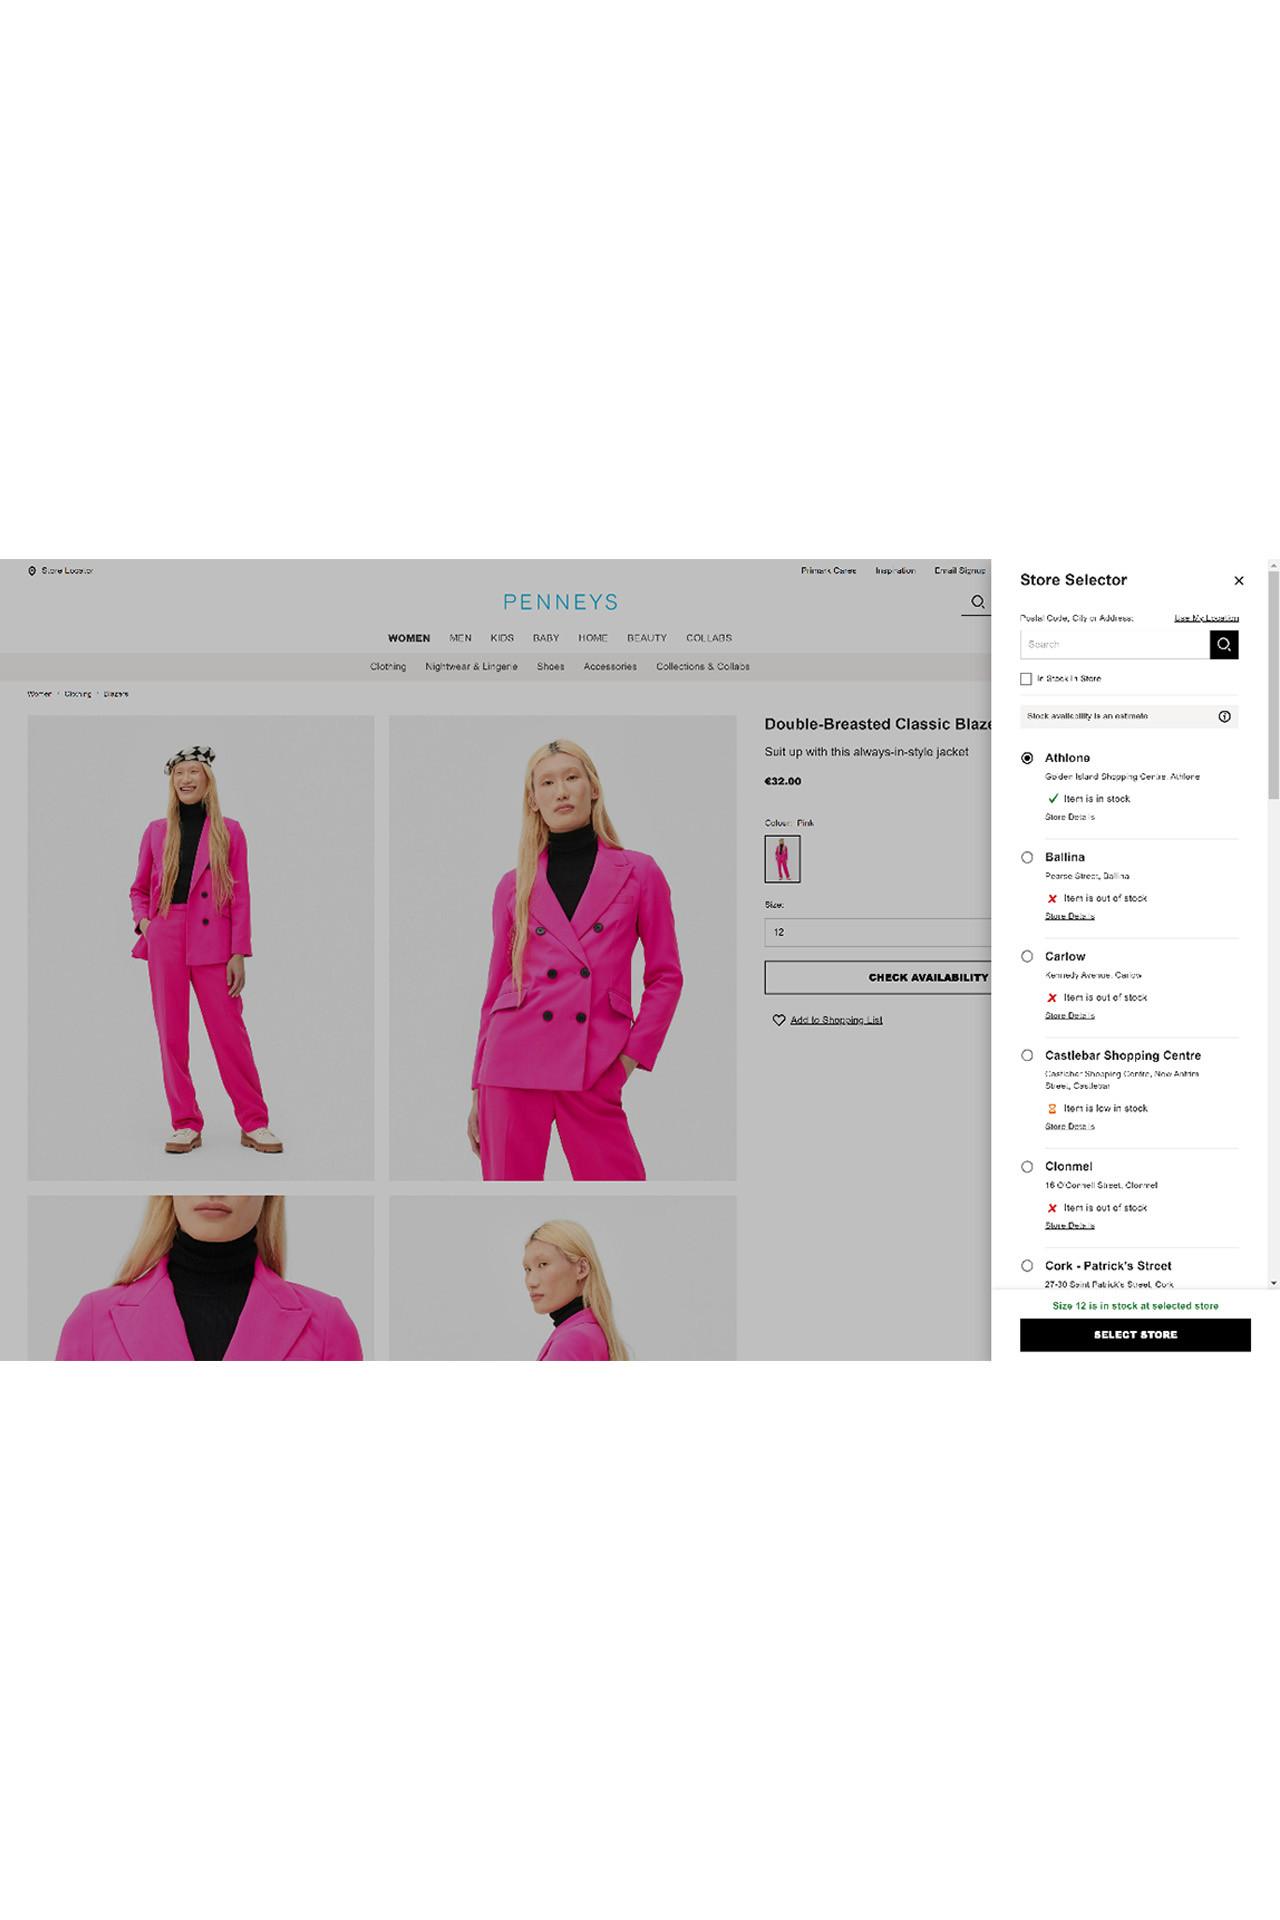 Penneys launches new website in Ireland